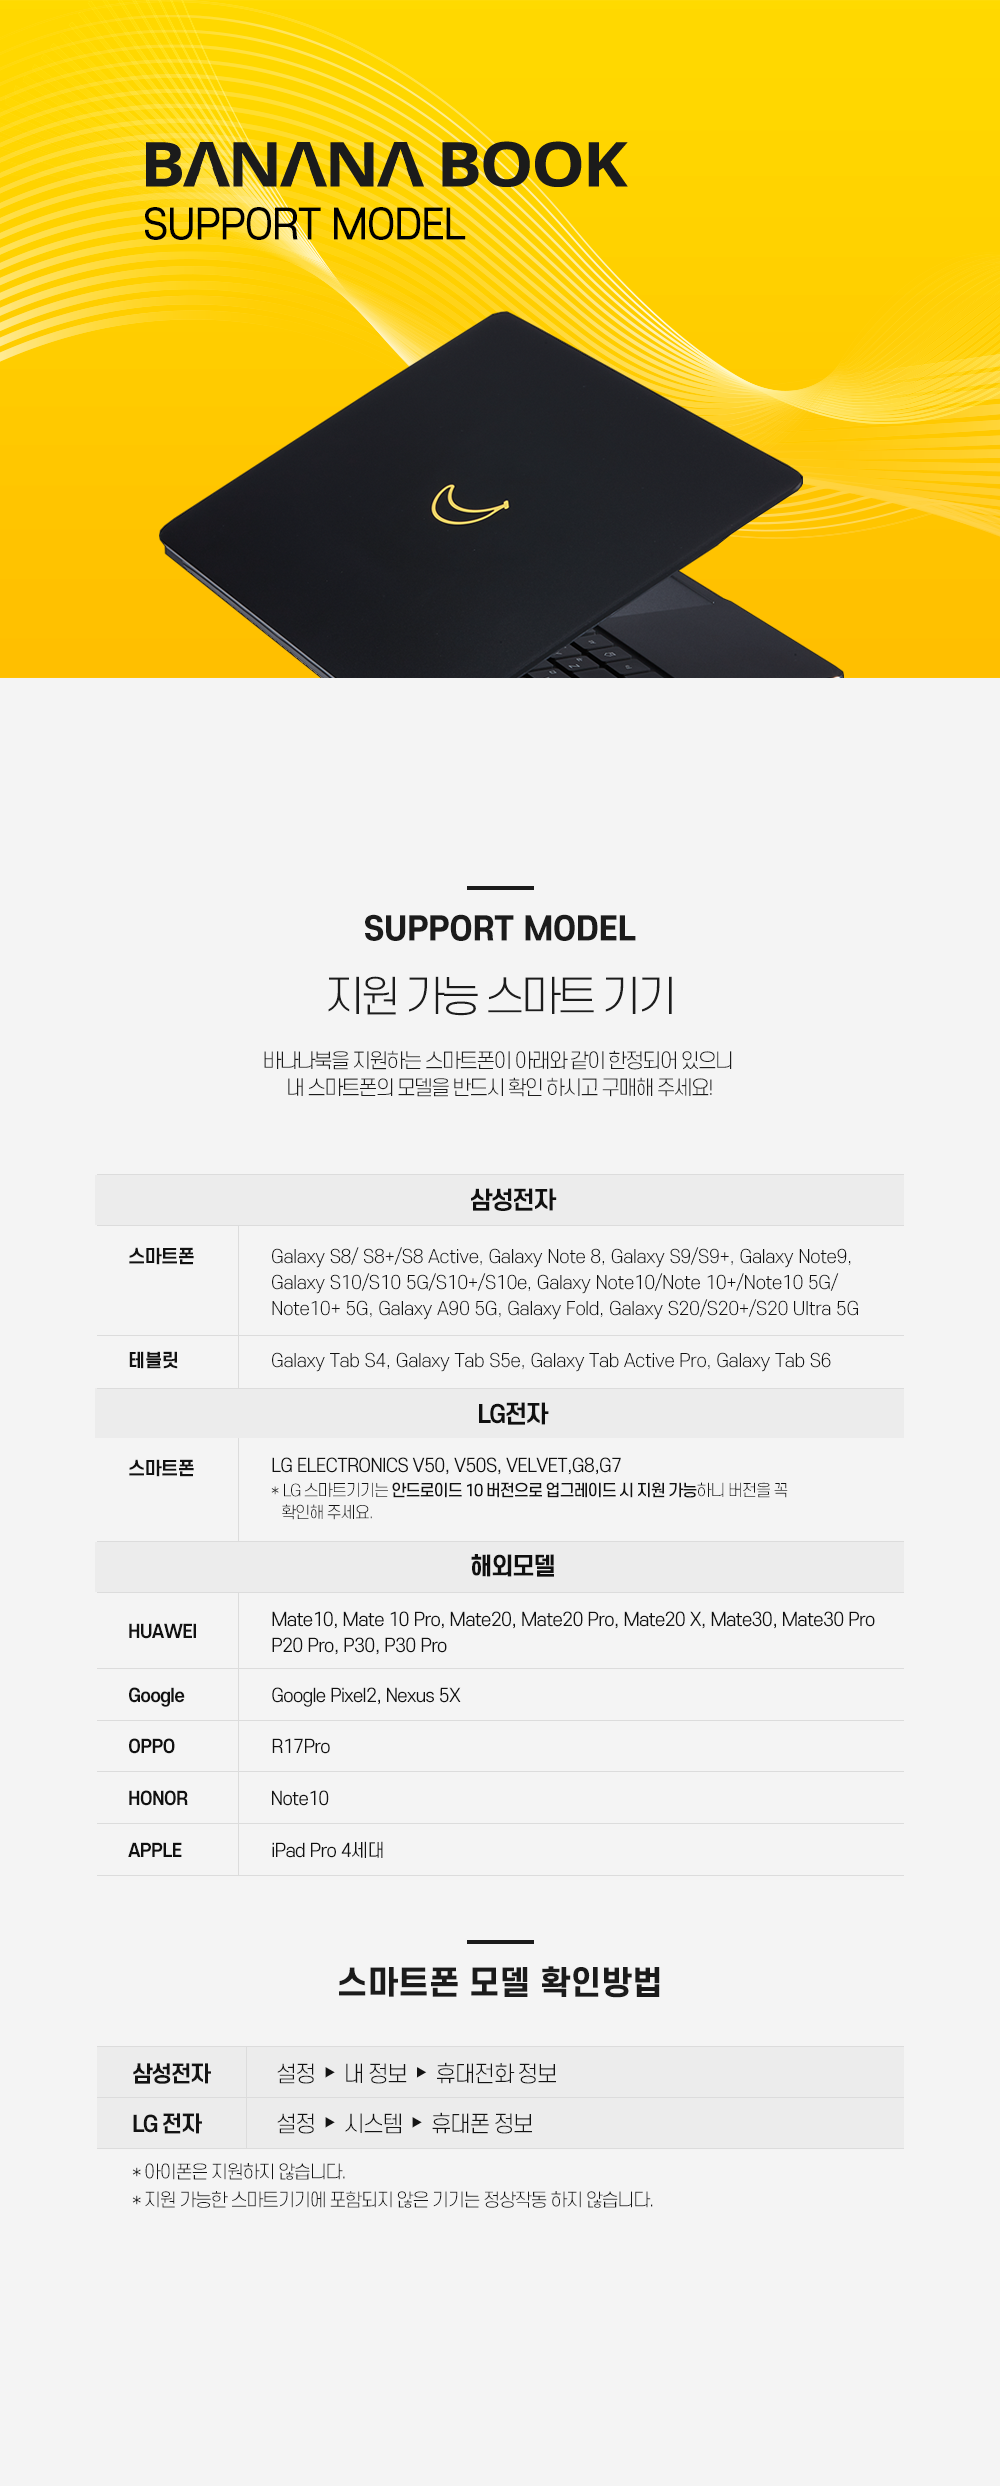 Support Model